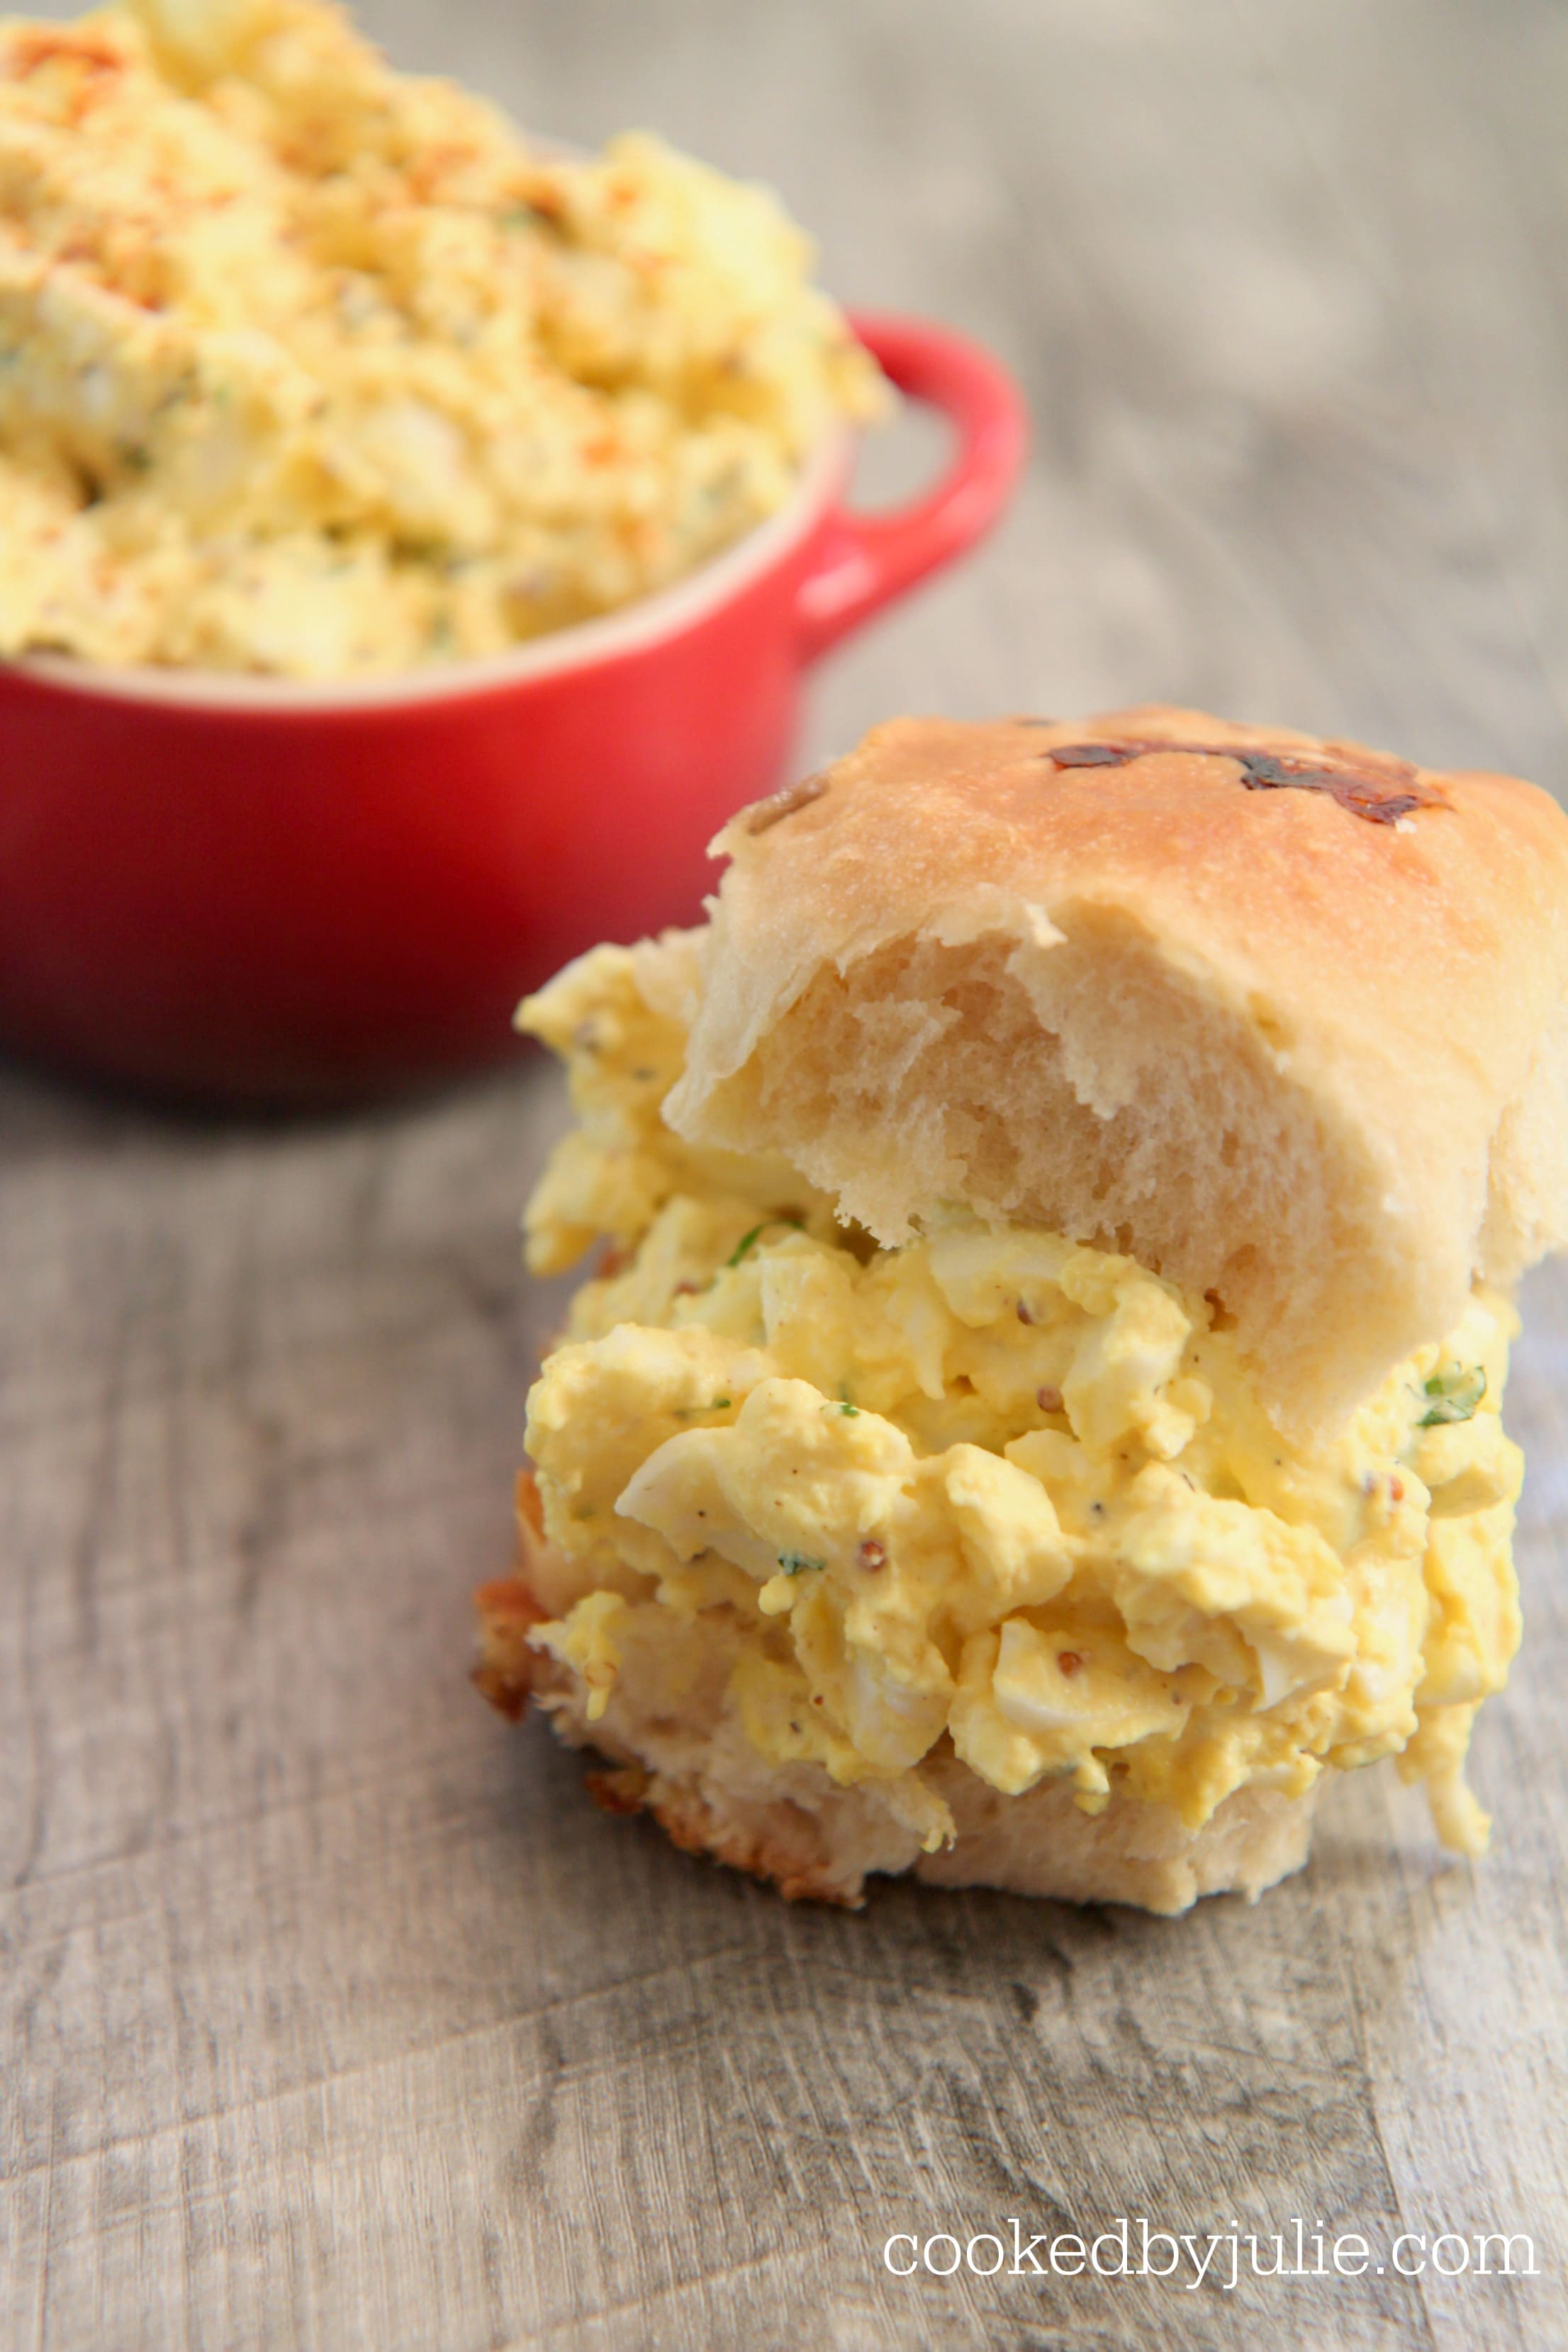 This egg salad recipe makes the best filling for sandwiches. 